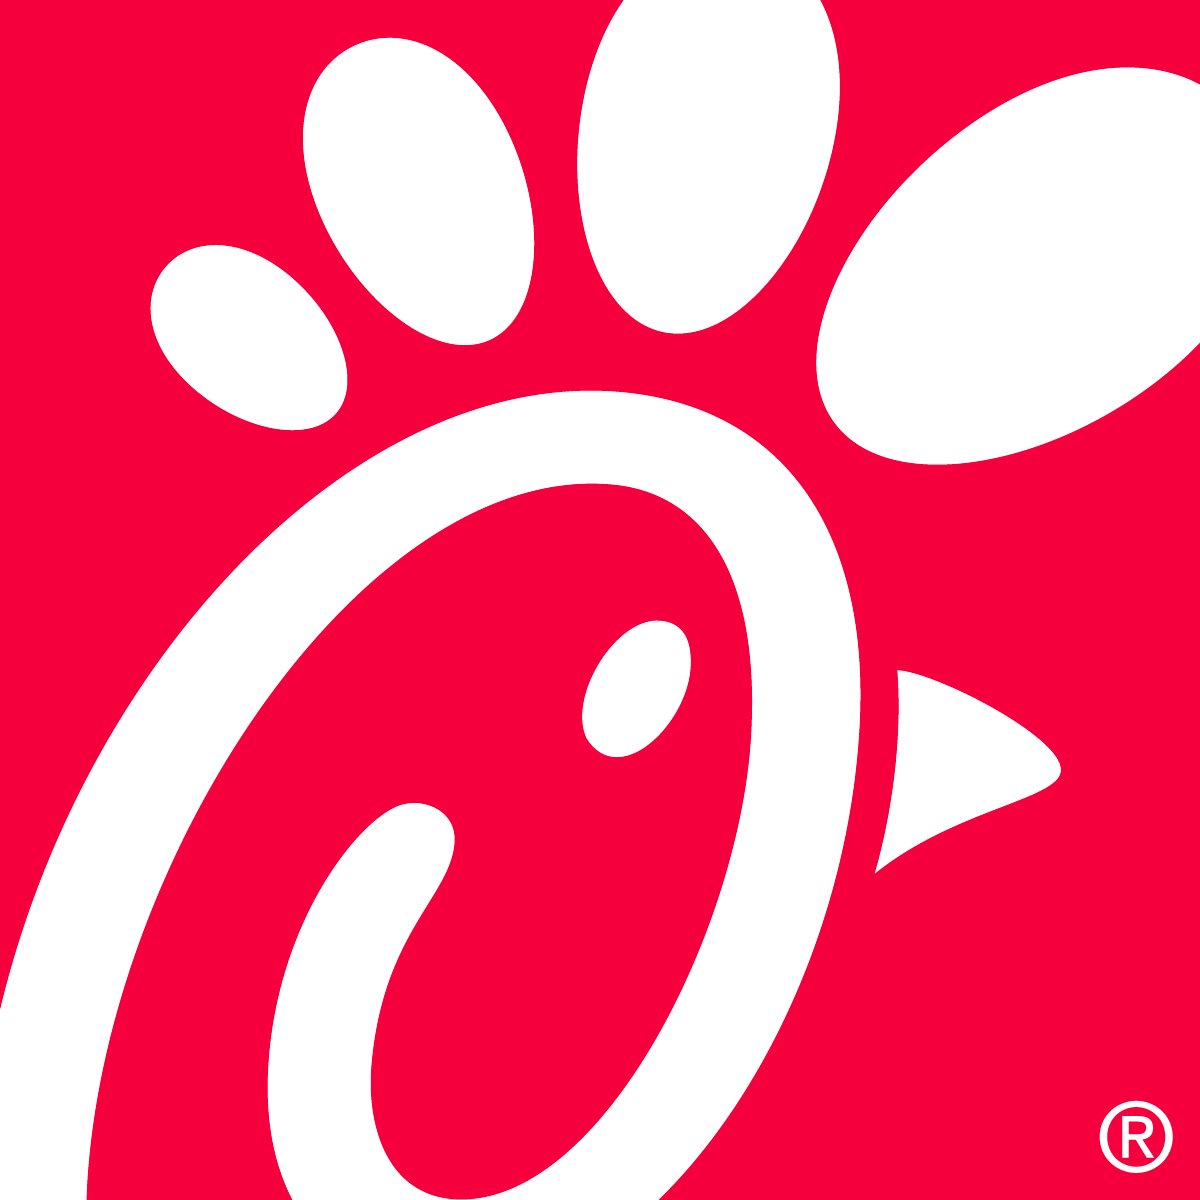 Chick-fil-A Okemos is a quick-service restaurant specializing in chicken sandwiches.  We strive to provide great food and 